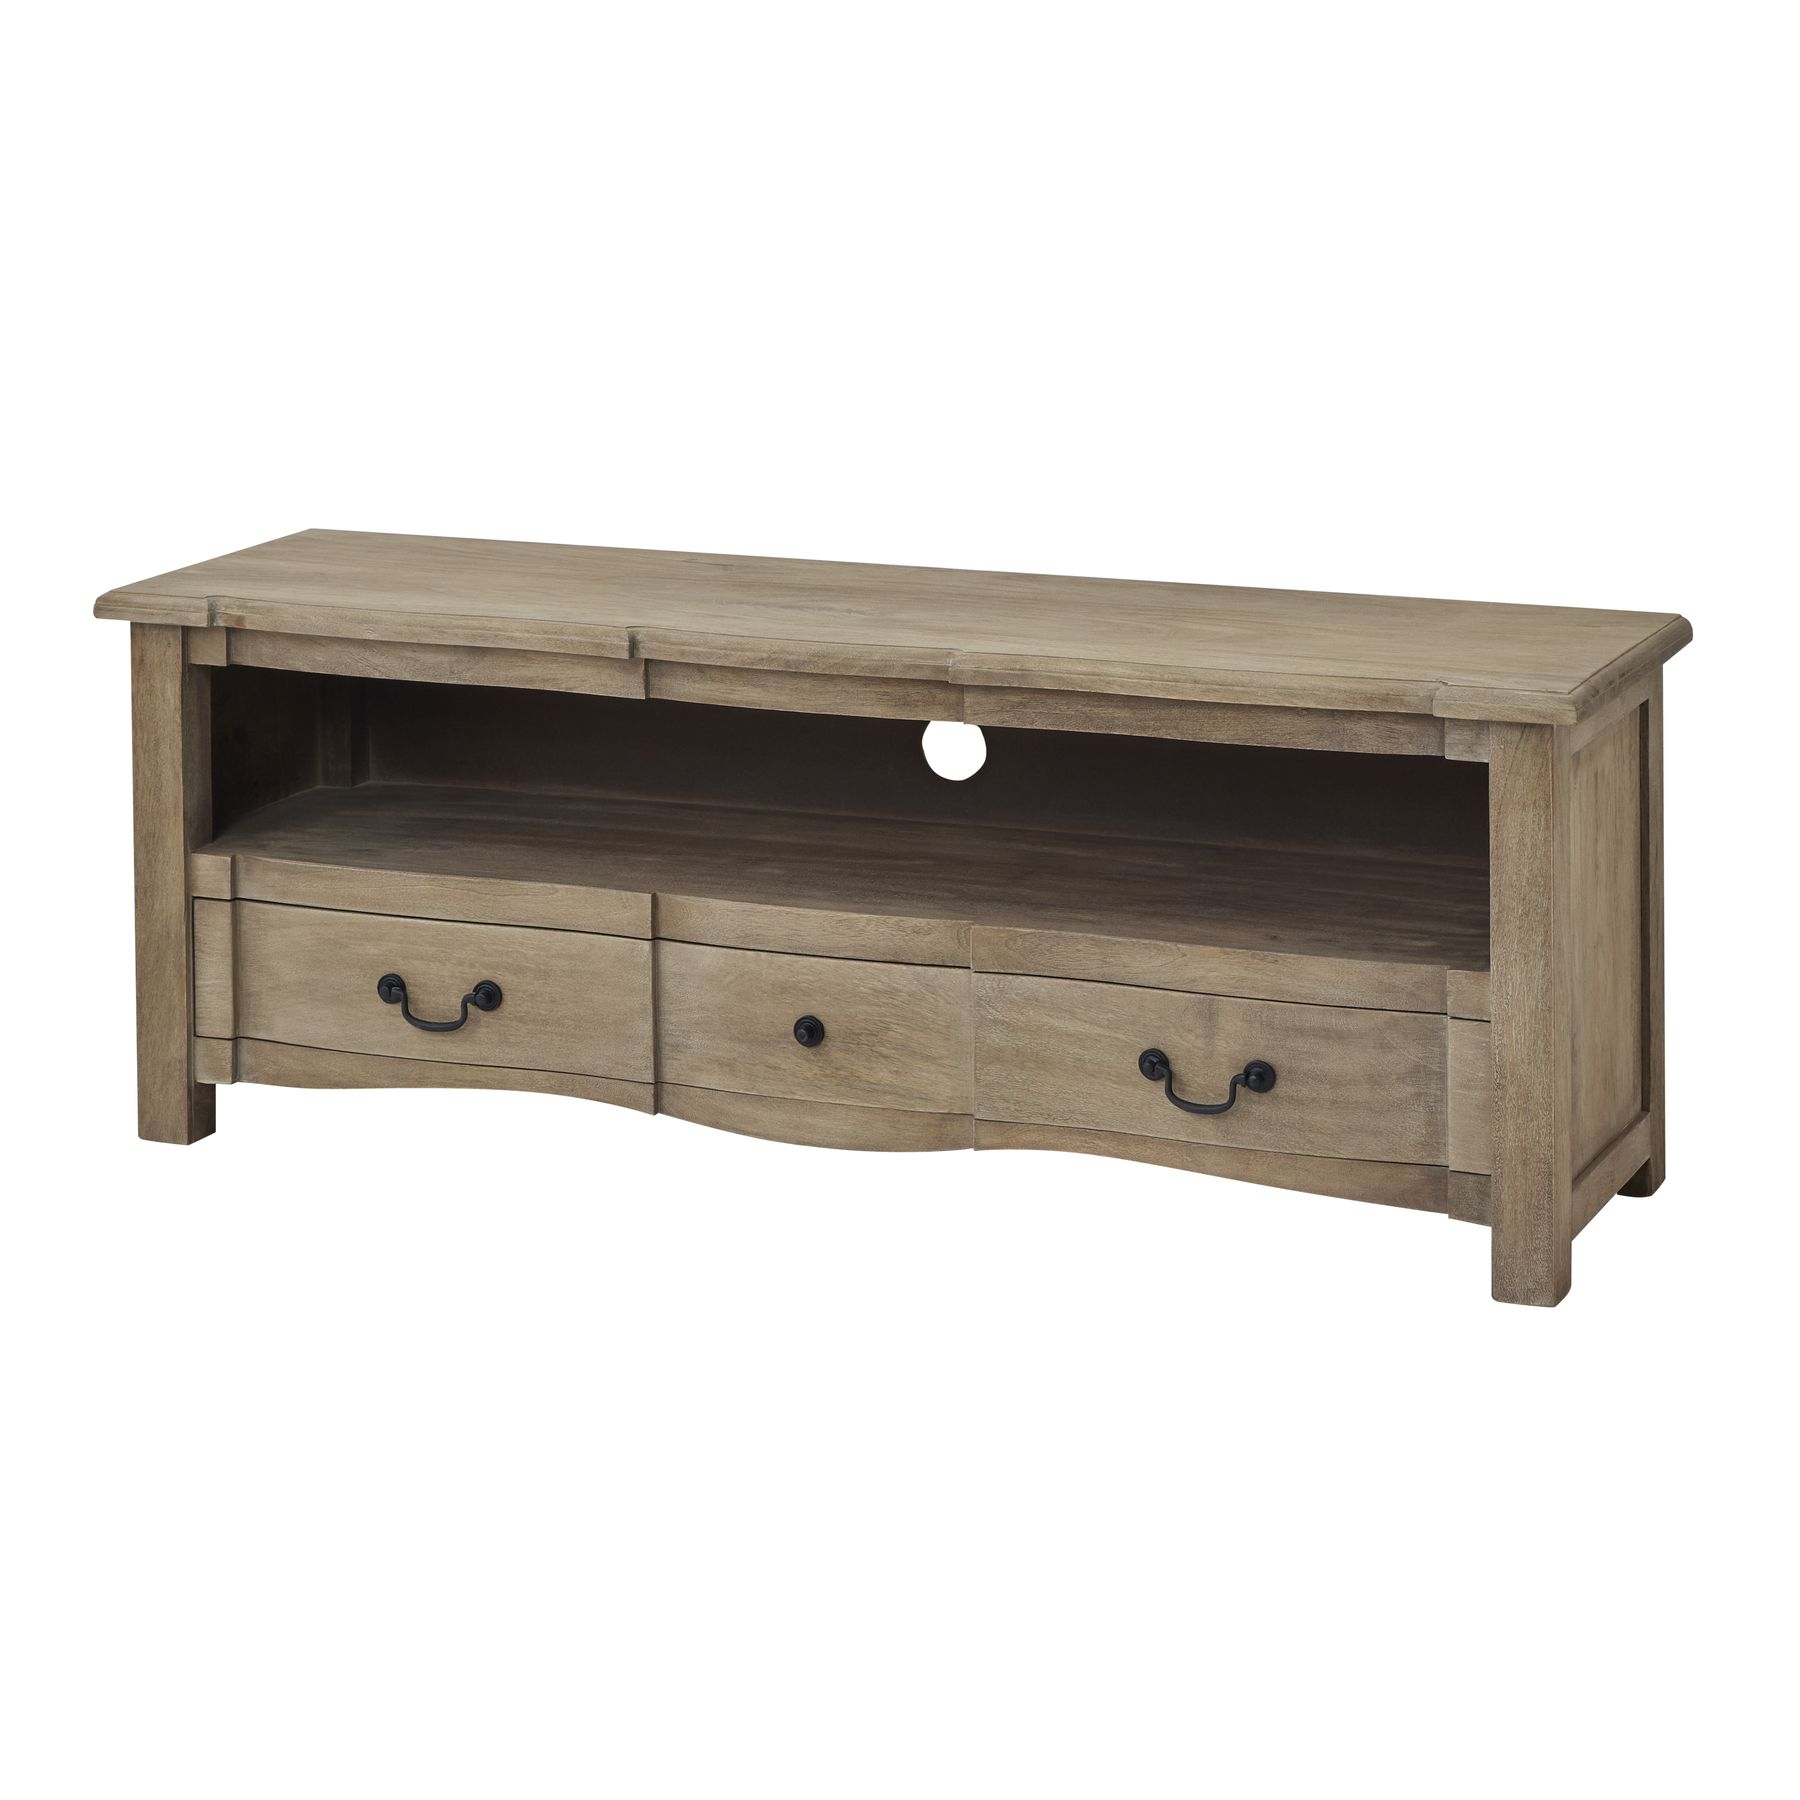 Copgrove Collection 1 Drawer Media Unit - Image 1